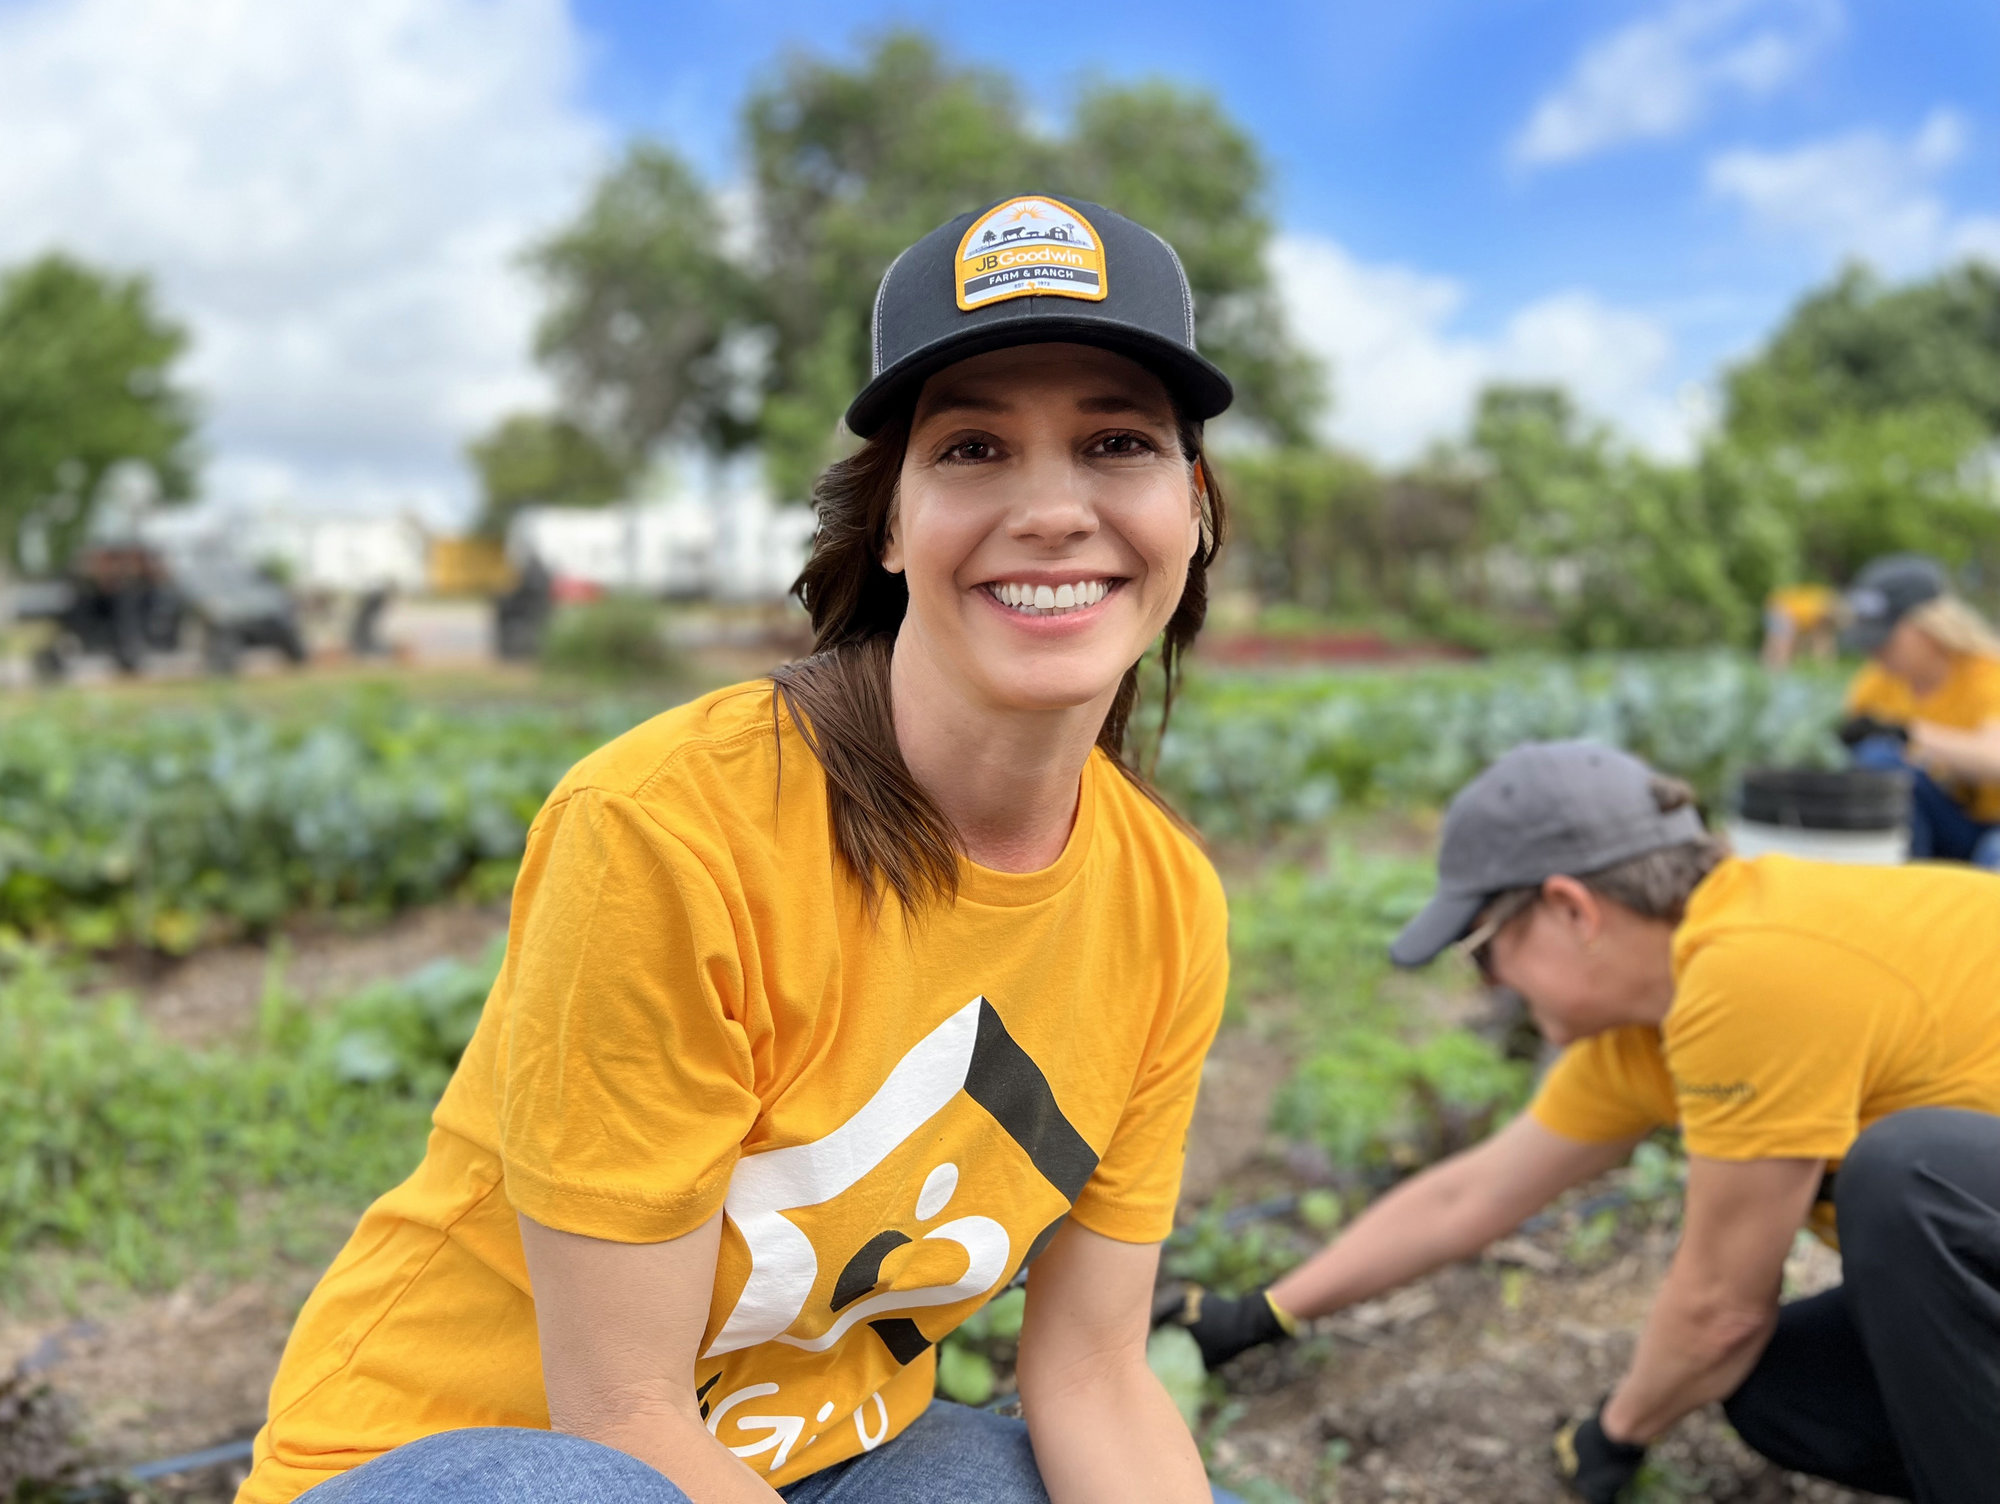 A JBGoodwin Austin agent volunteers at a community for the formerly homeless.